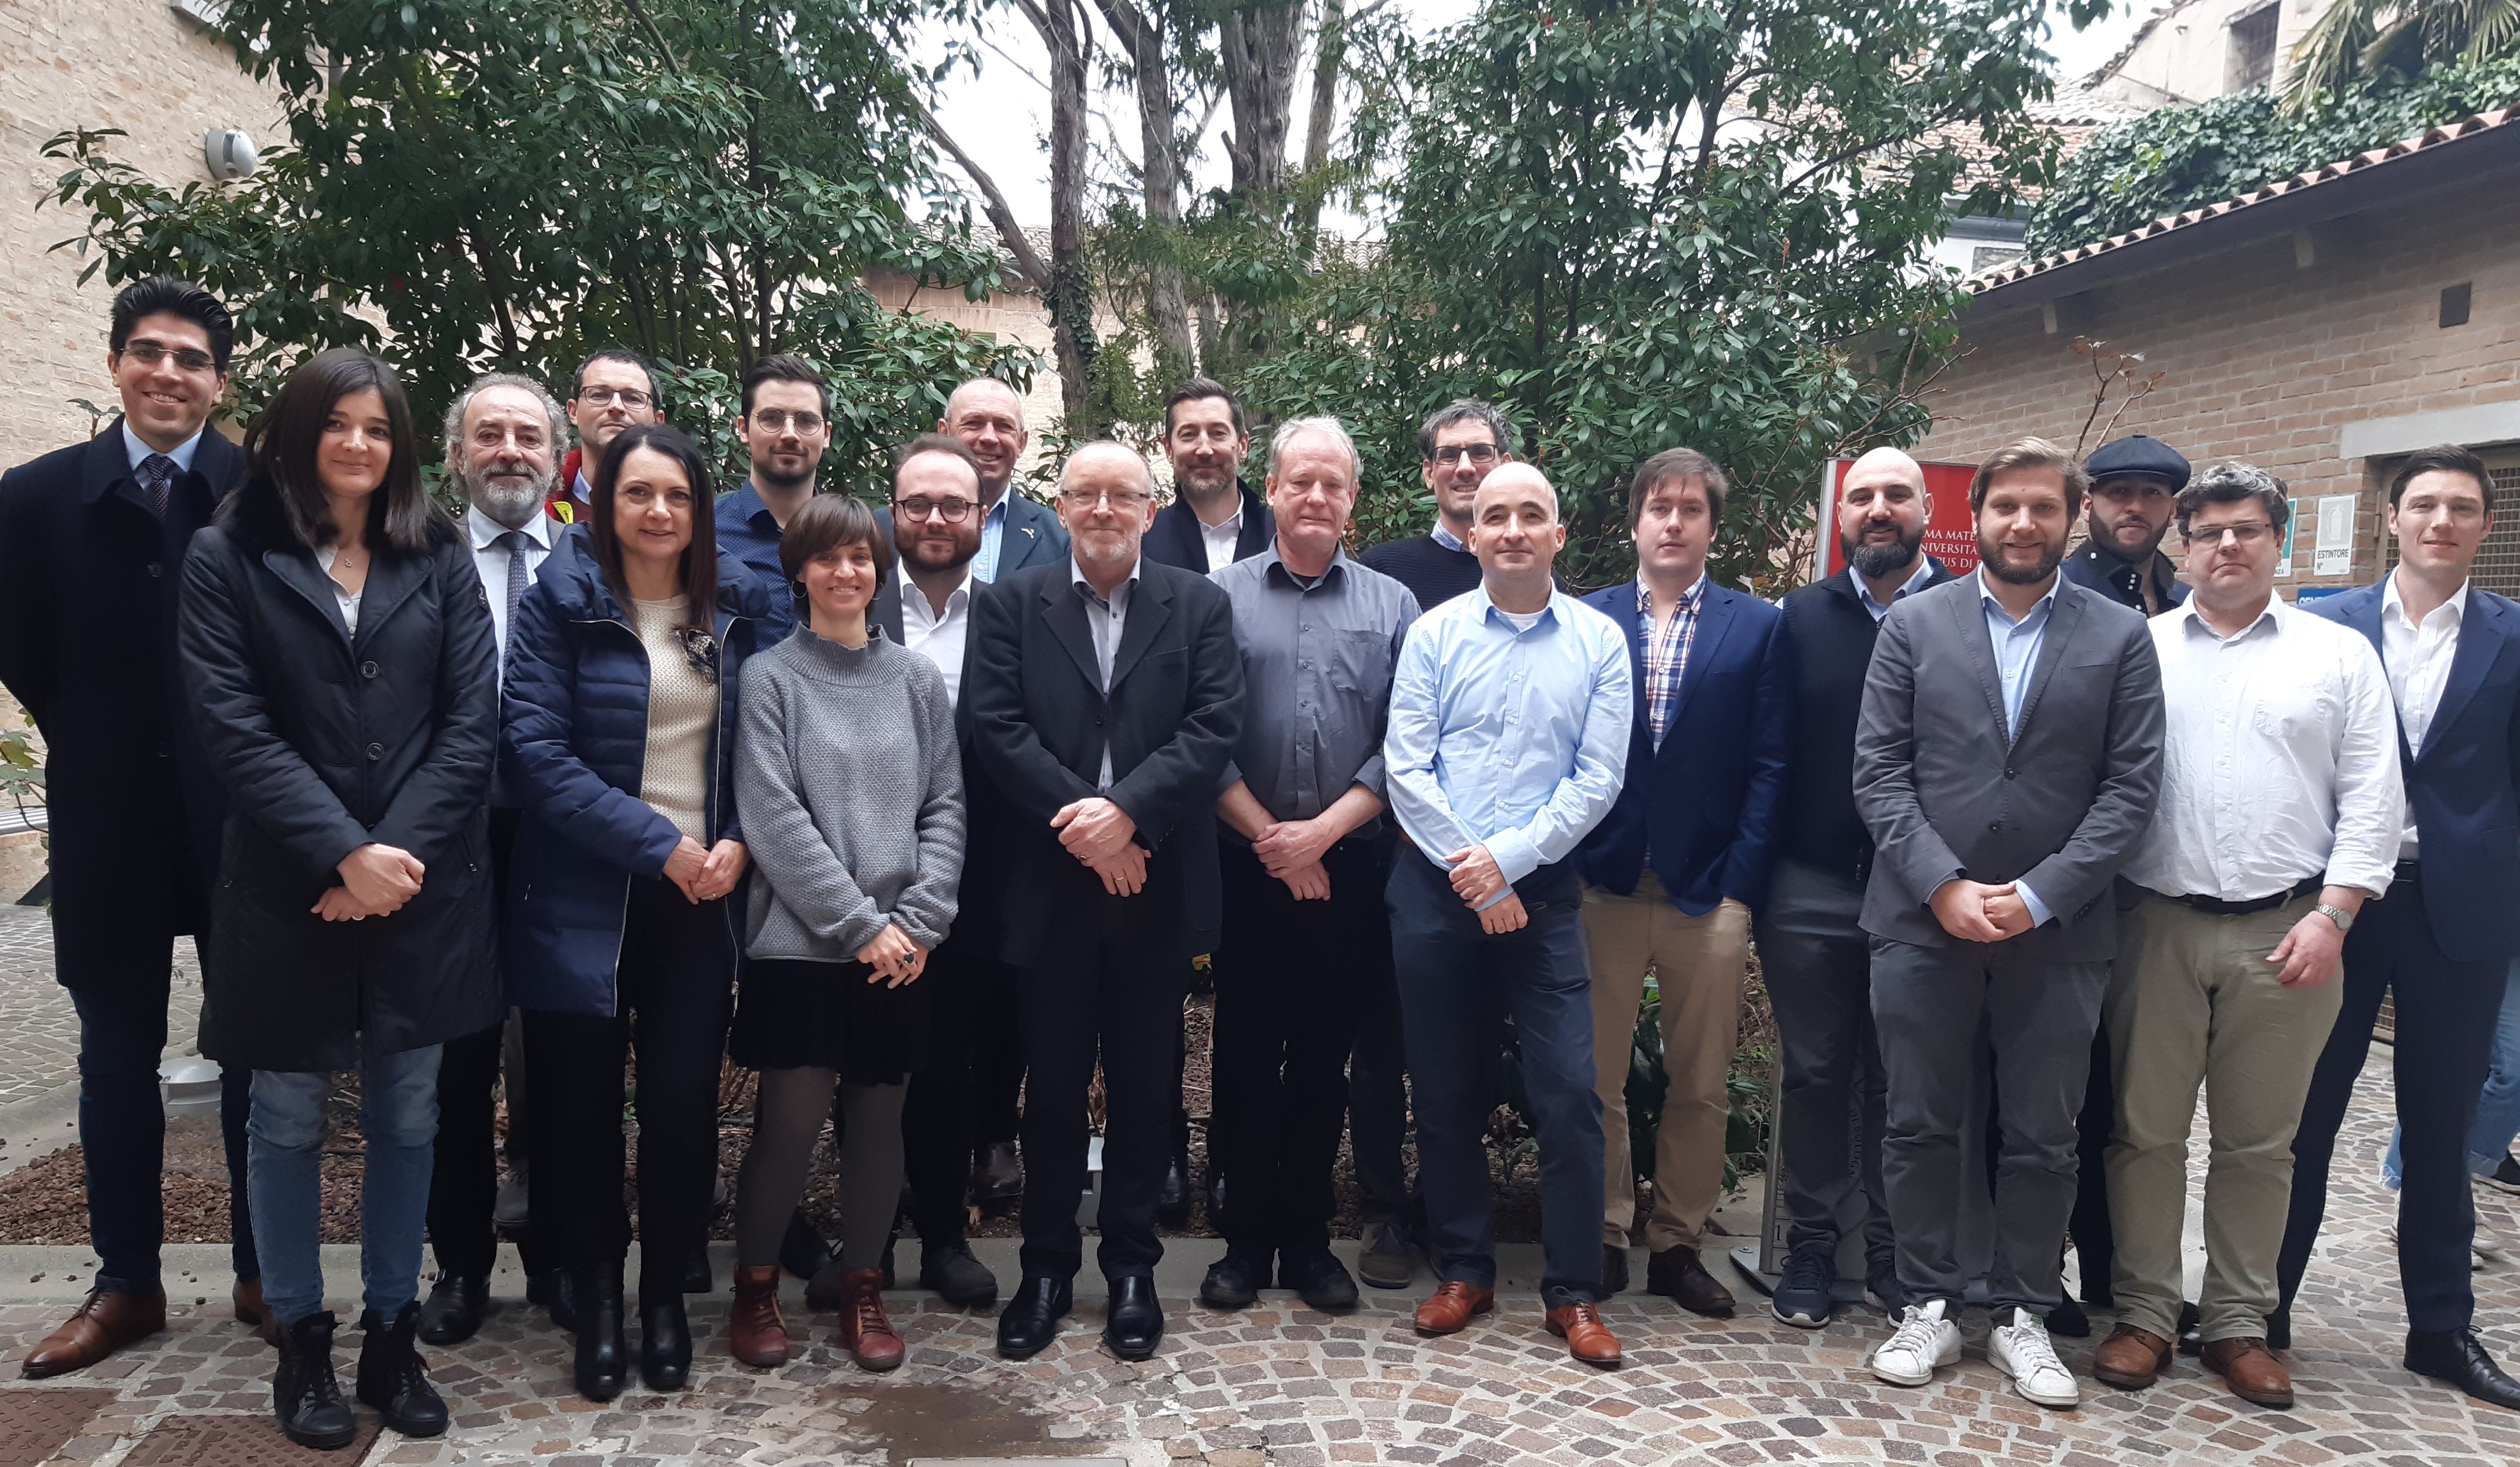 TO-SYN-FUEL project: Advisory Board meeting in Ravenna, Italy “Conversion of biogenic residues into advanced biofuels for a low carbon economy”